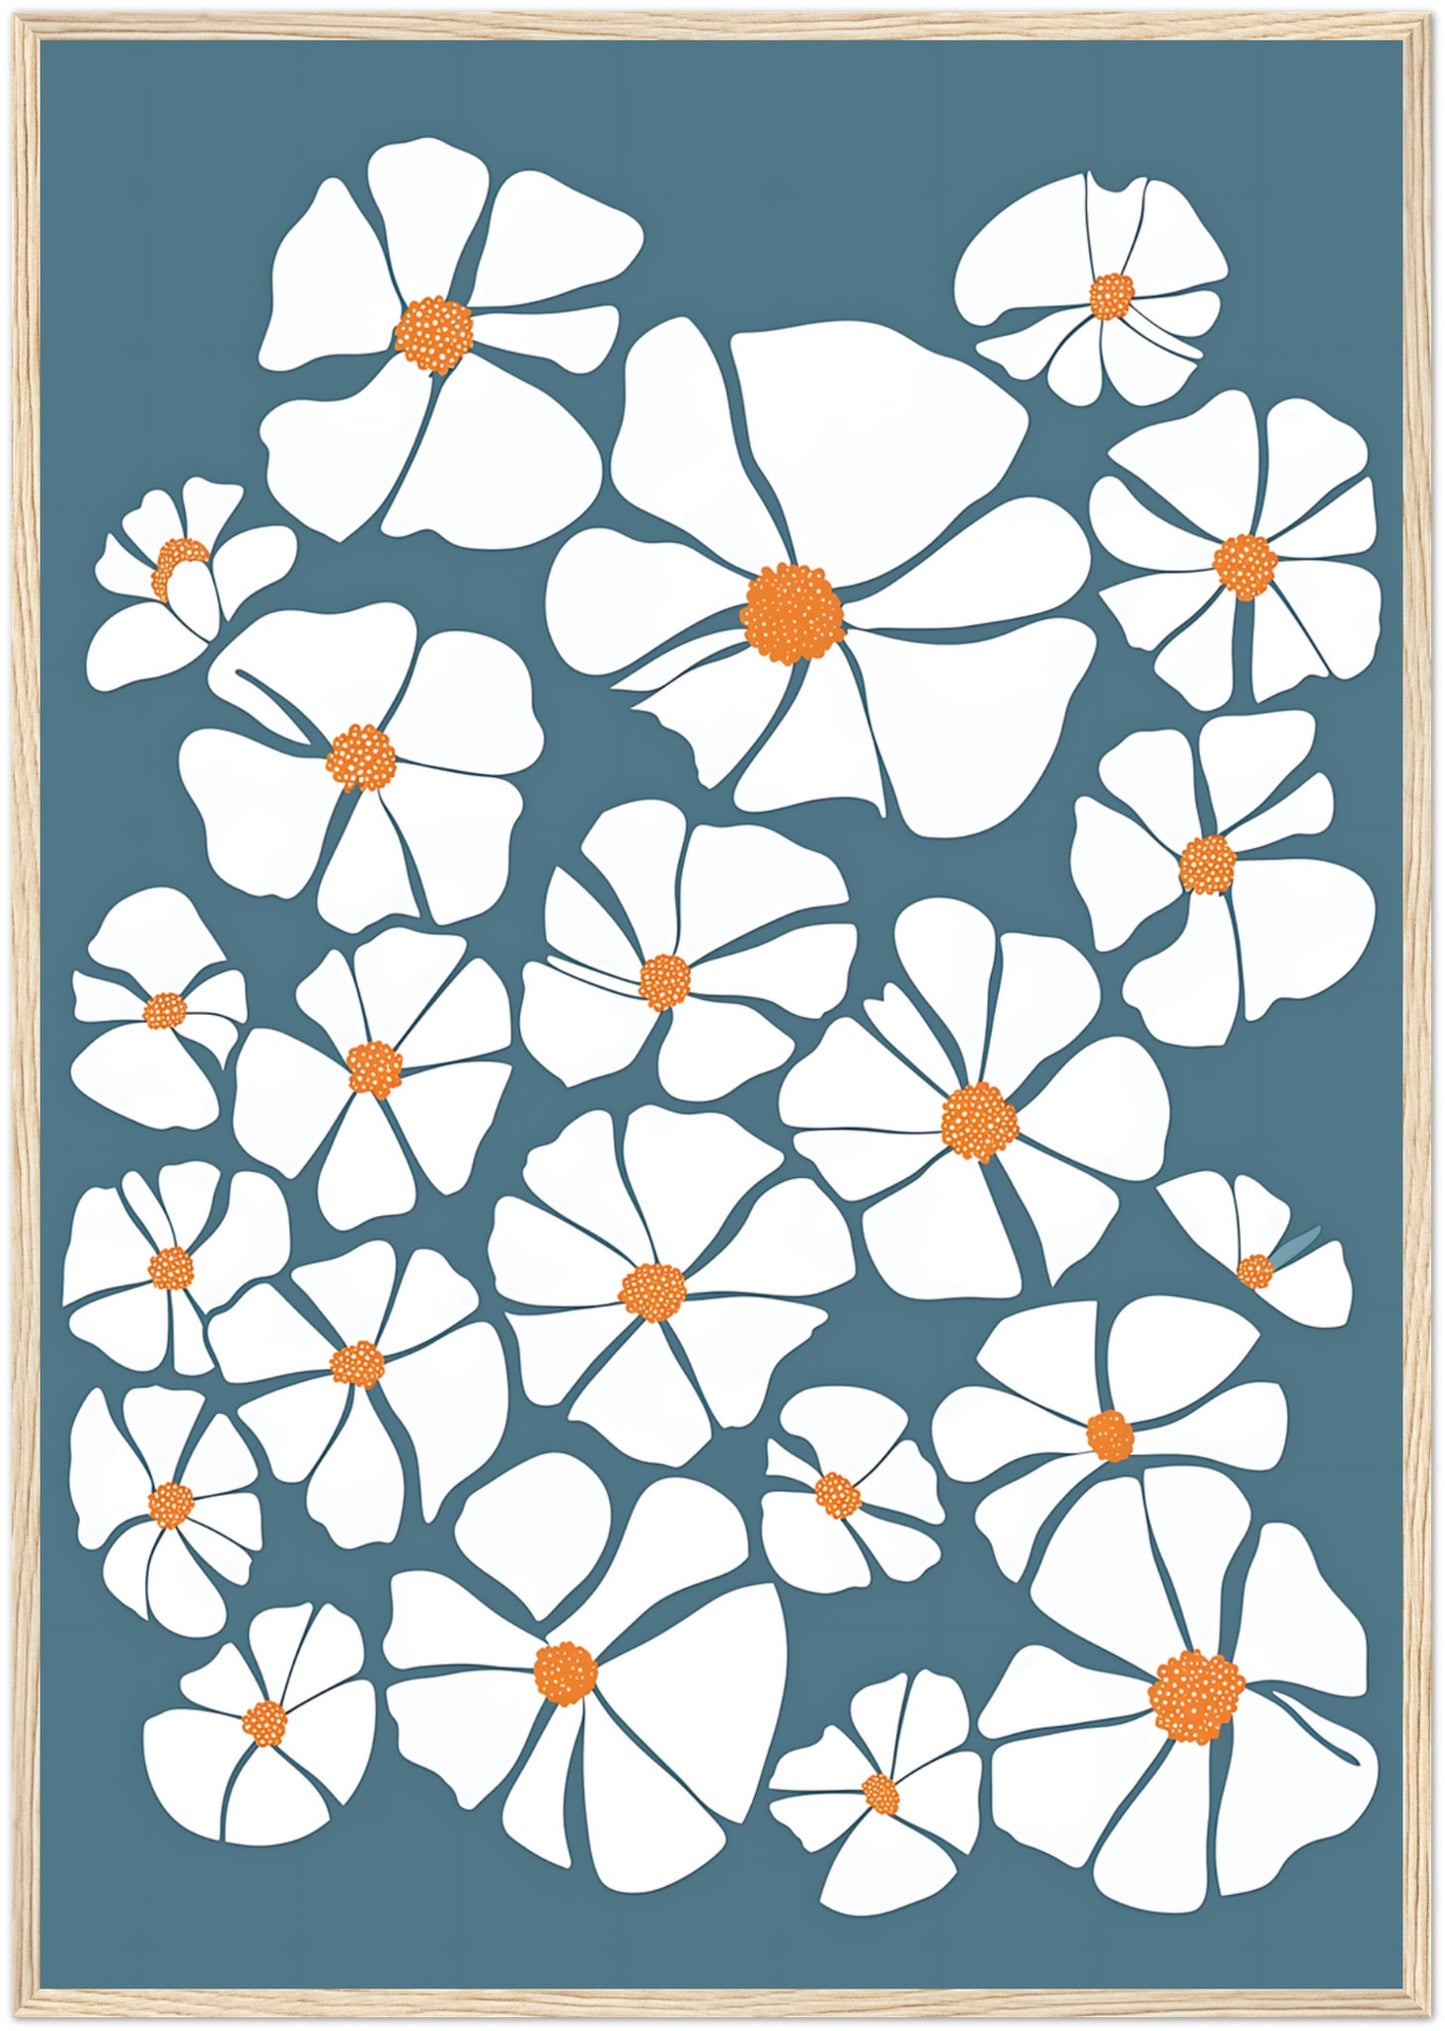 A framed illustration of stylized white flowers with orange centers on a blue background.